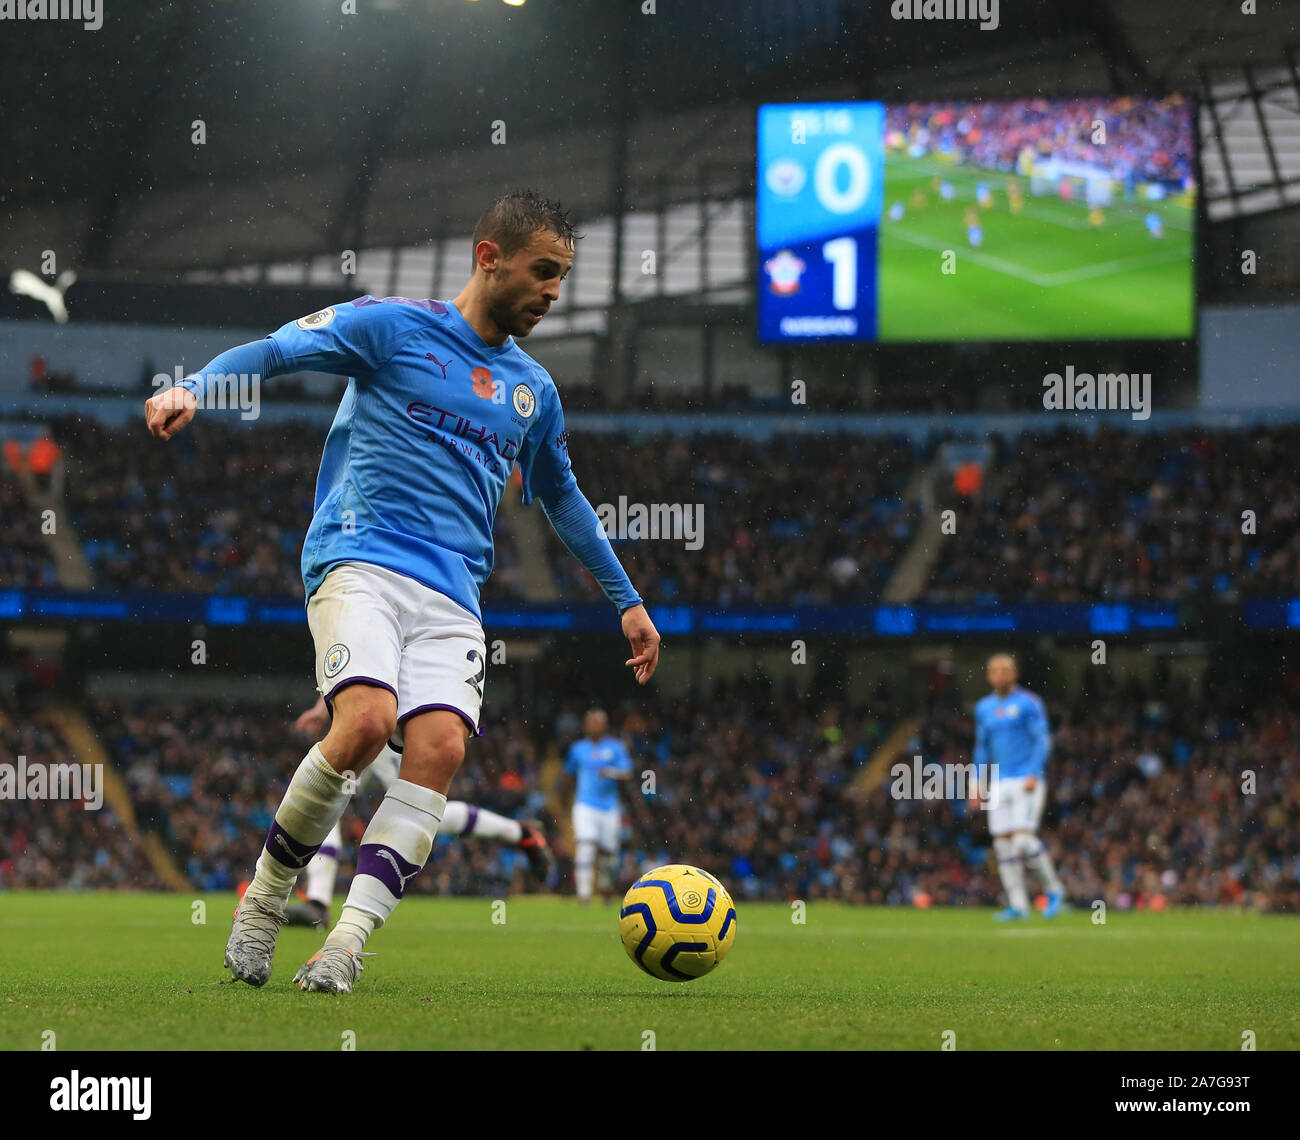 Etihad Stadium, Manchester, Lancashire, UK. 2nd Nov, 2019. English Premier League Football, Manchester City versus Southampton; Bernardo Silva of Manchester City controls the ball before crossing into the box - Strictly Editorial Use Only. No use with unauthorized audio, video, data, fixture lists, club/league logos or 'live' services. Online in-match use limited to 120 images, no video emulation. No use in betting, games or single club/league/player publications Credit: Action Plus Sports/Alamy Live News Stock Photo